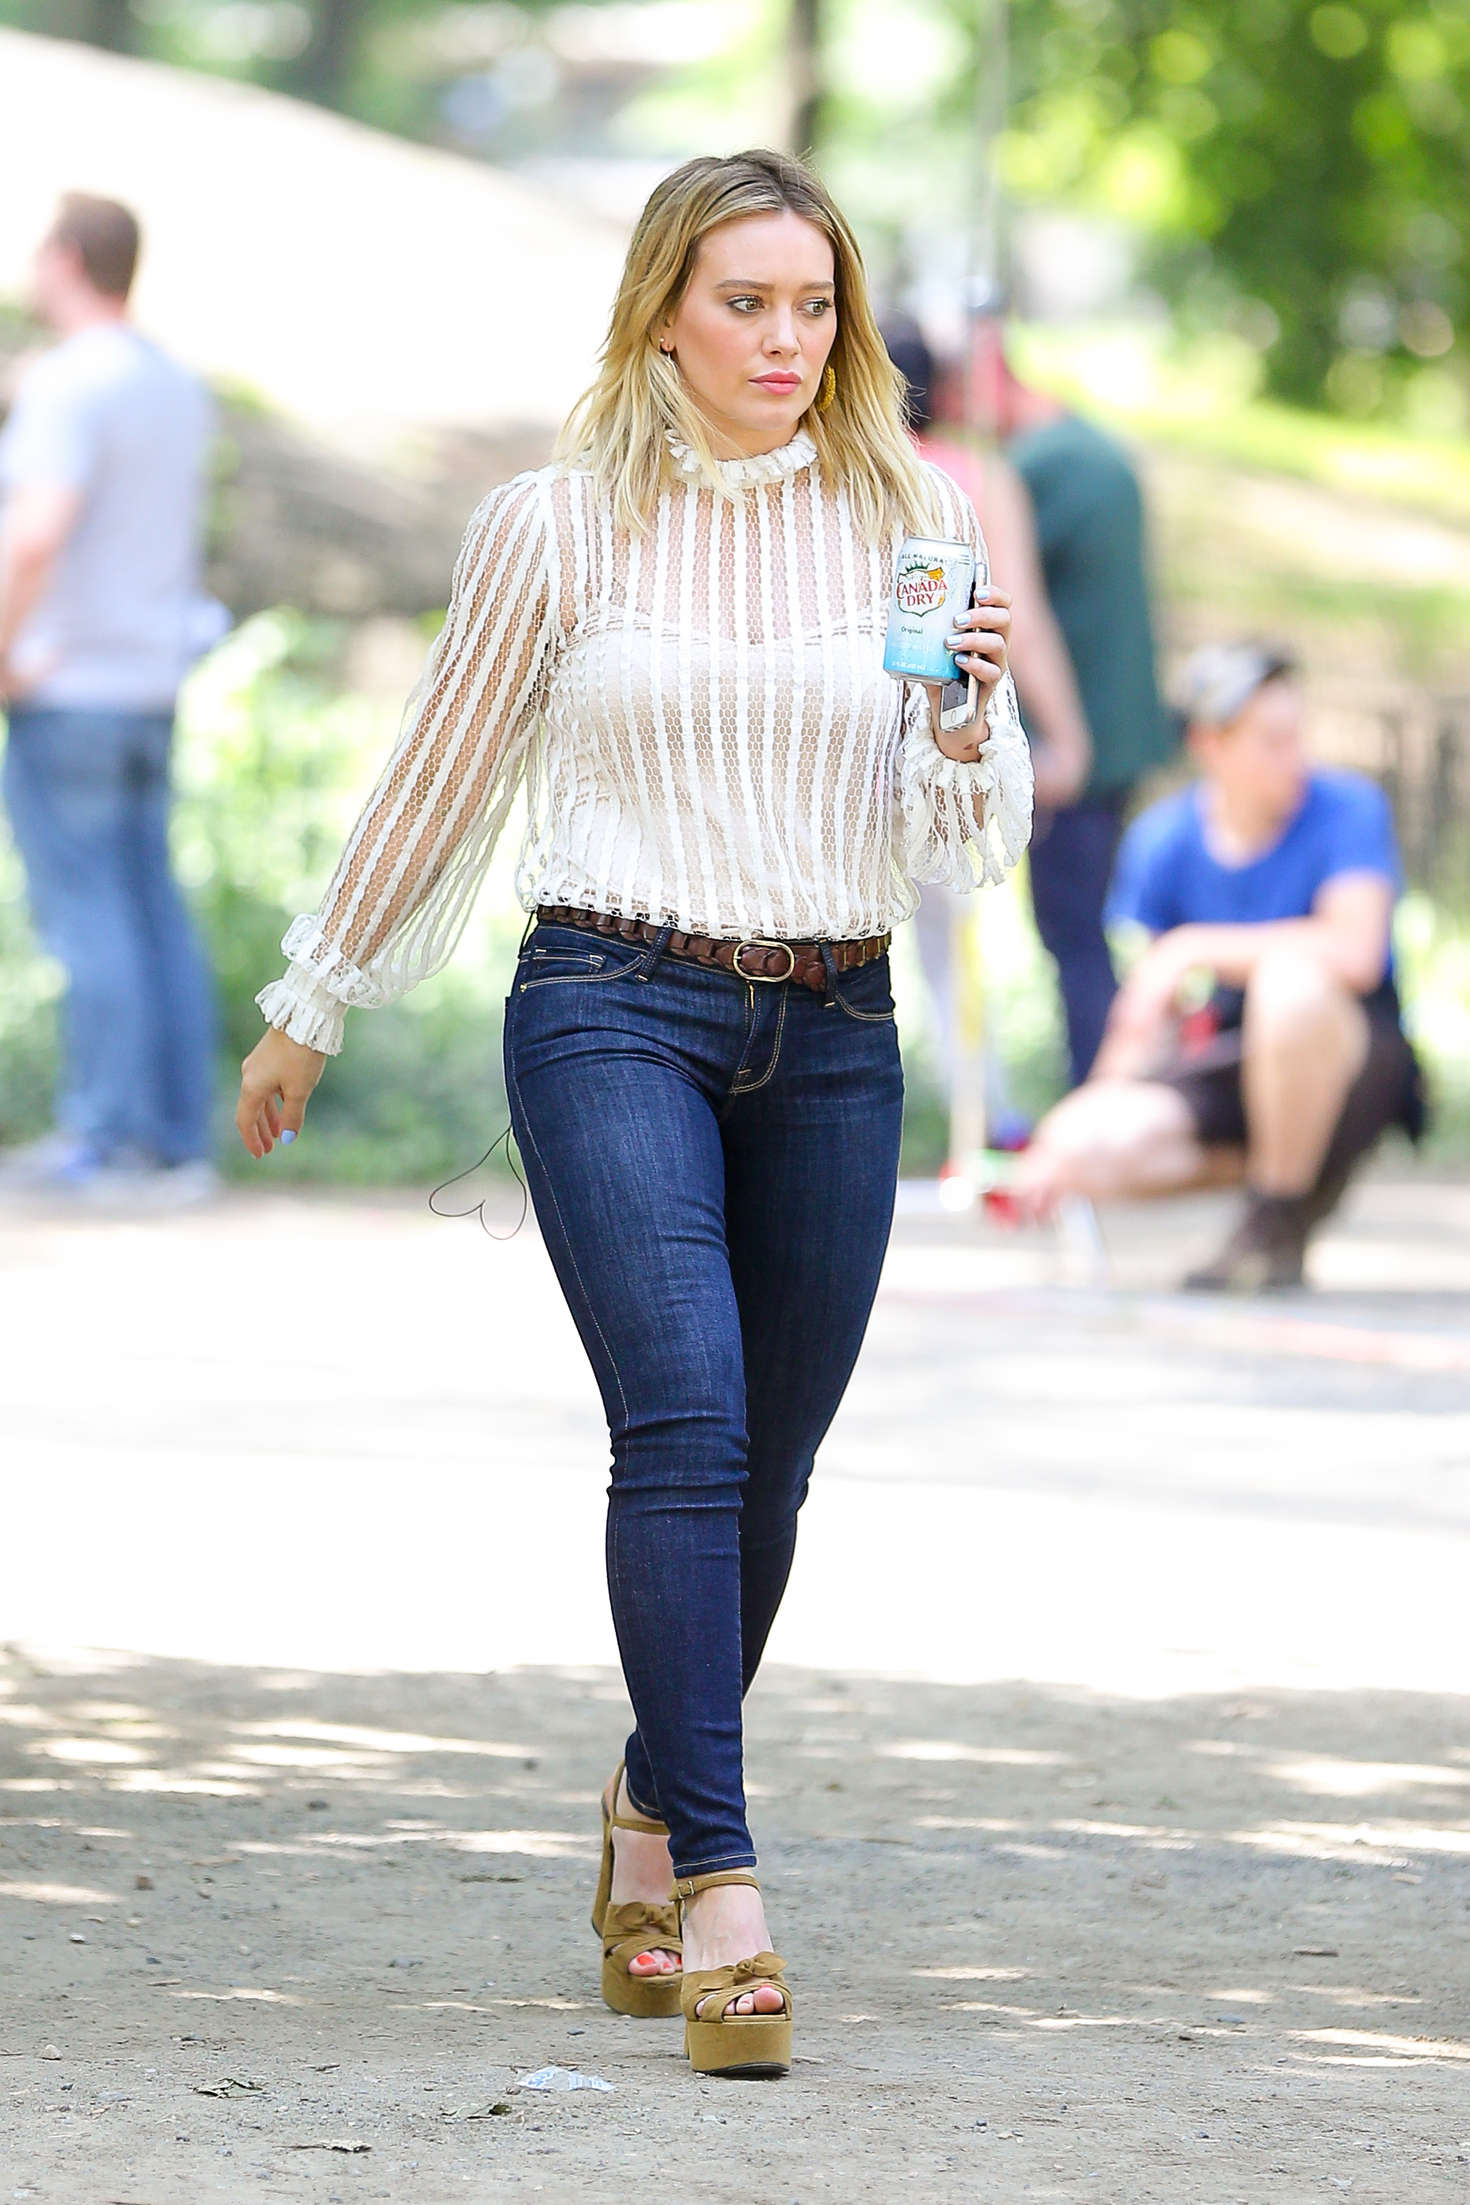 Hilary Duff Booty in Tight Jeans -01 | GotCeleb